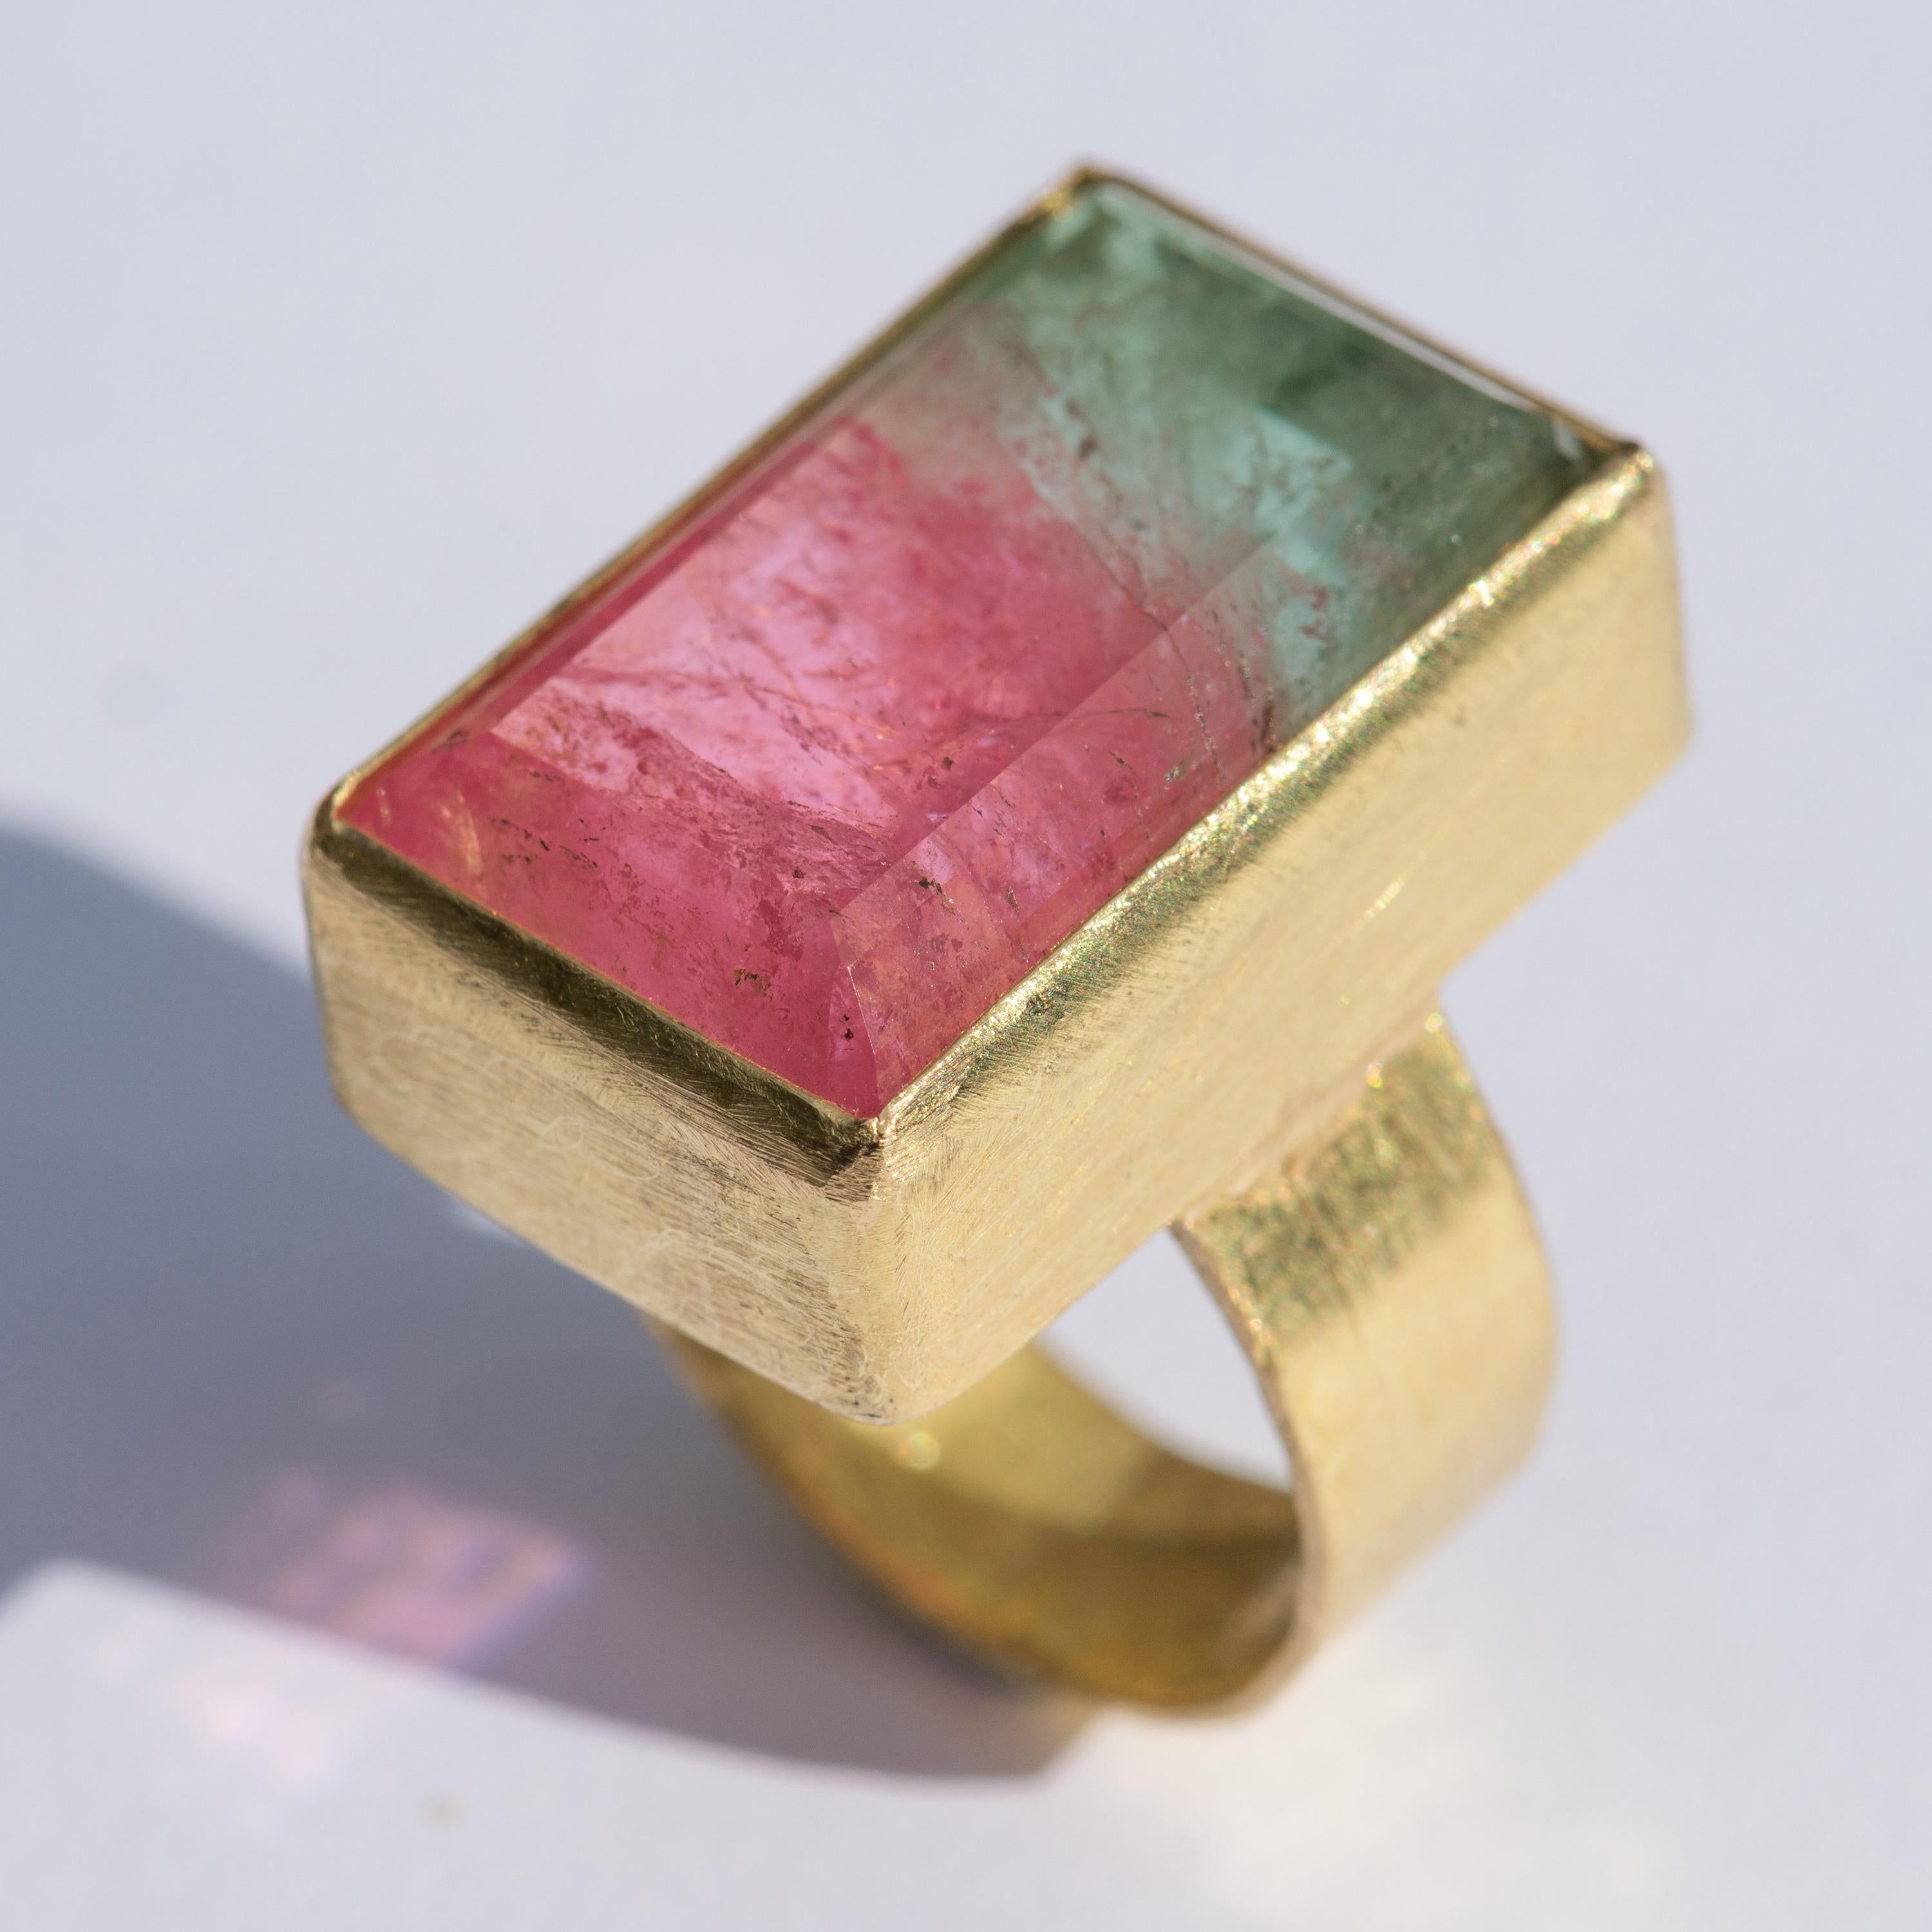 A two tone pink and mint green tourmaline, 31.48 carats rectangular stone set in hammered textured 18kt gold. 

Often known as a Watermelon Tourmaline this is a beautiful example of Tourmaline as it transitions from one colour to another. The fresh